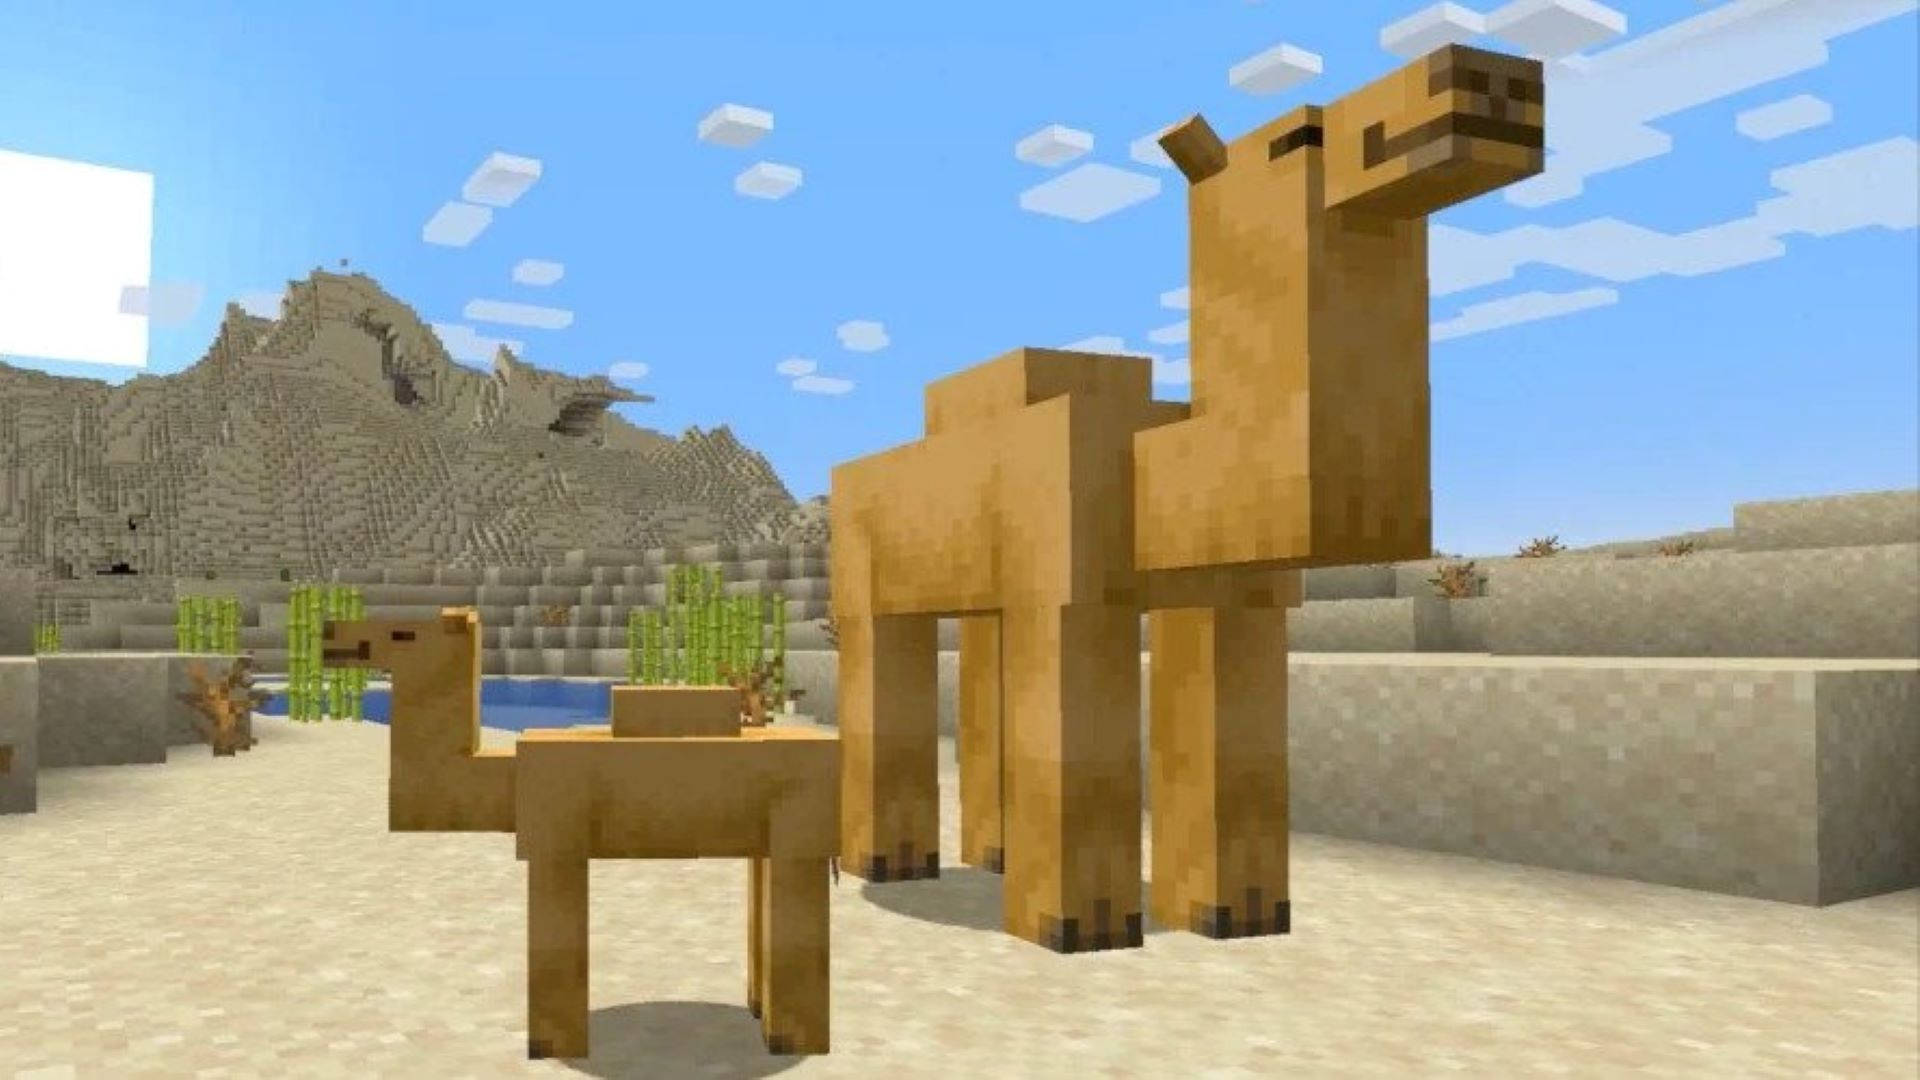 Camels In The Desert Minecraft Hd